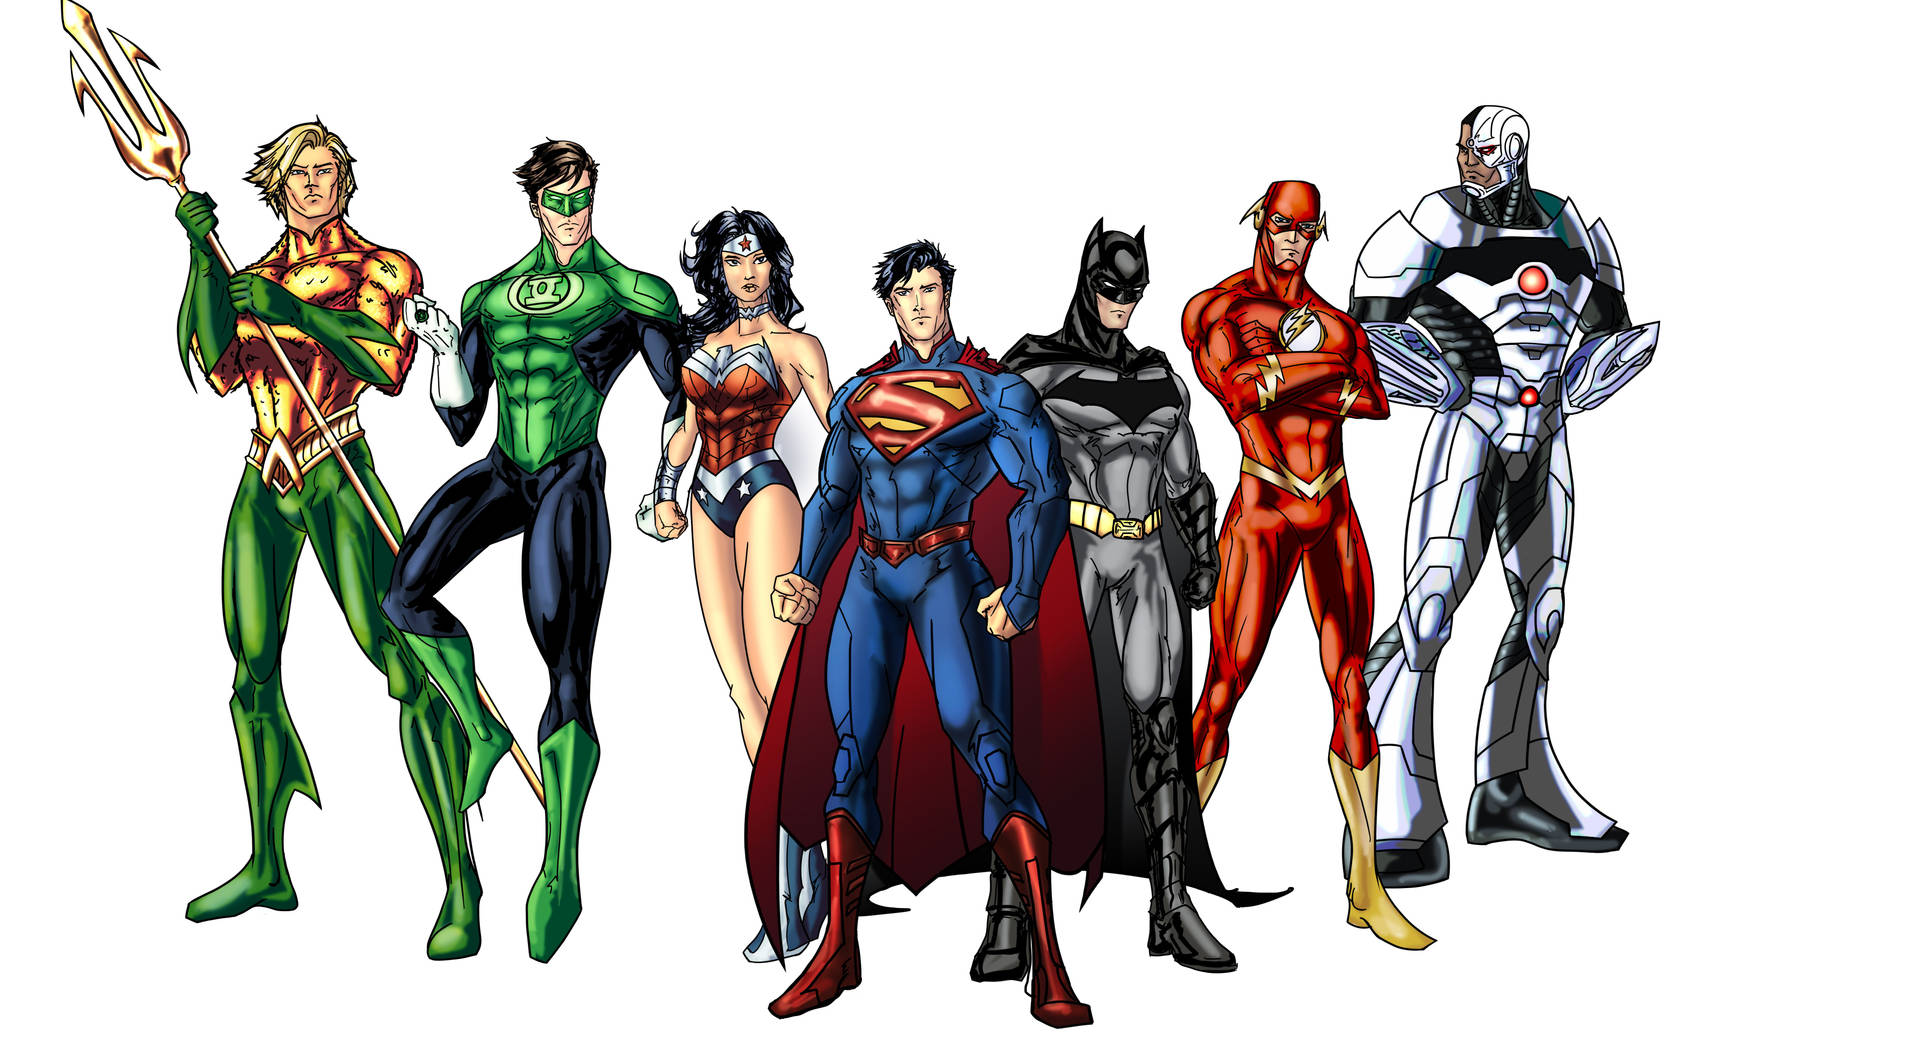 Justice League 7636X4200 Wallpaper and Background Image